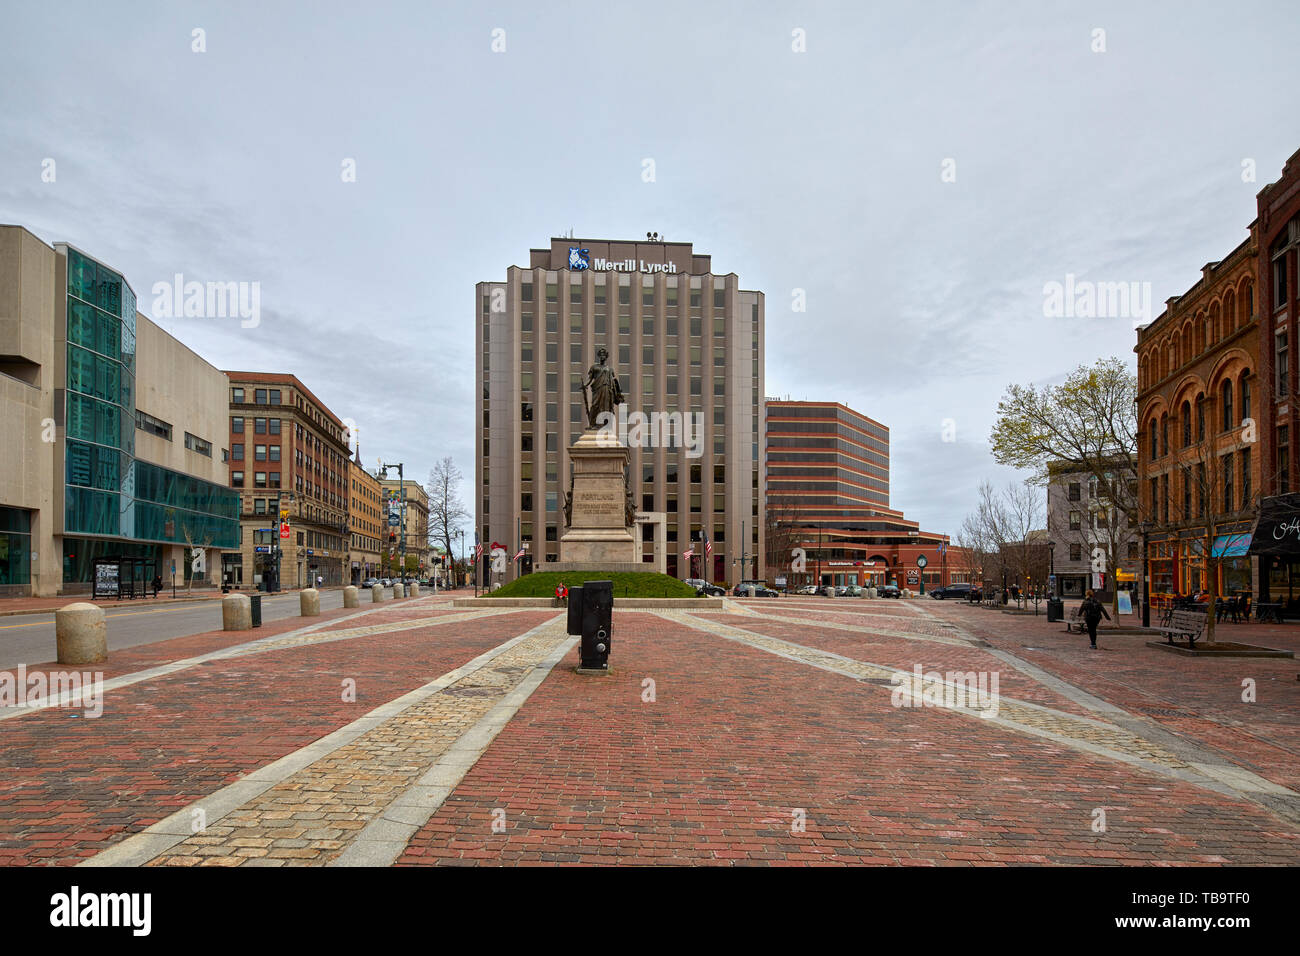 Merrill Lynch building and  Portland Soldiers and Sailors Monument by  Franklin Simmons in Monument Square in Portland Maine USA, United States ME Stock Photo